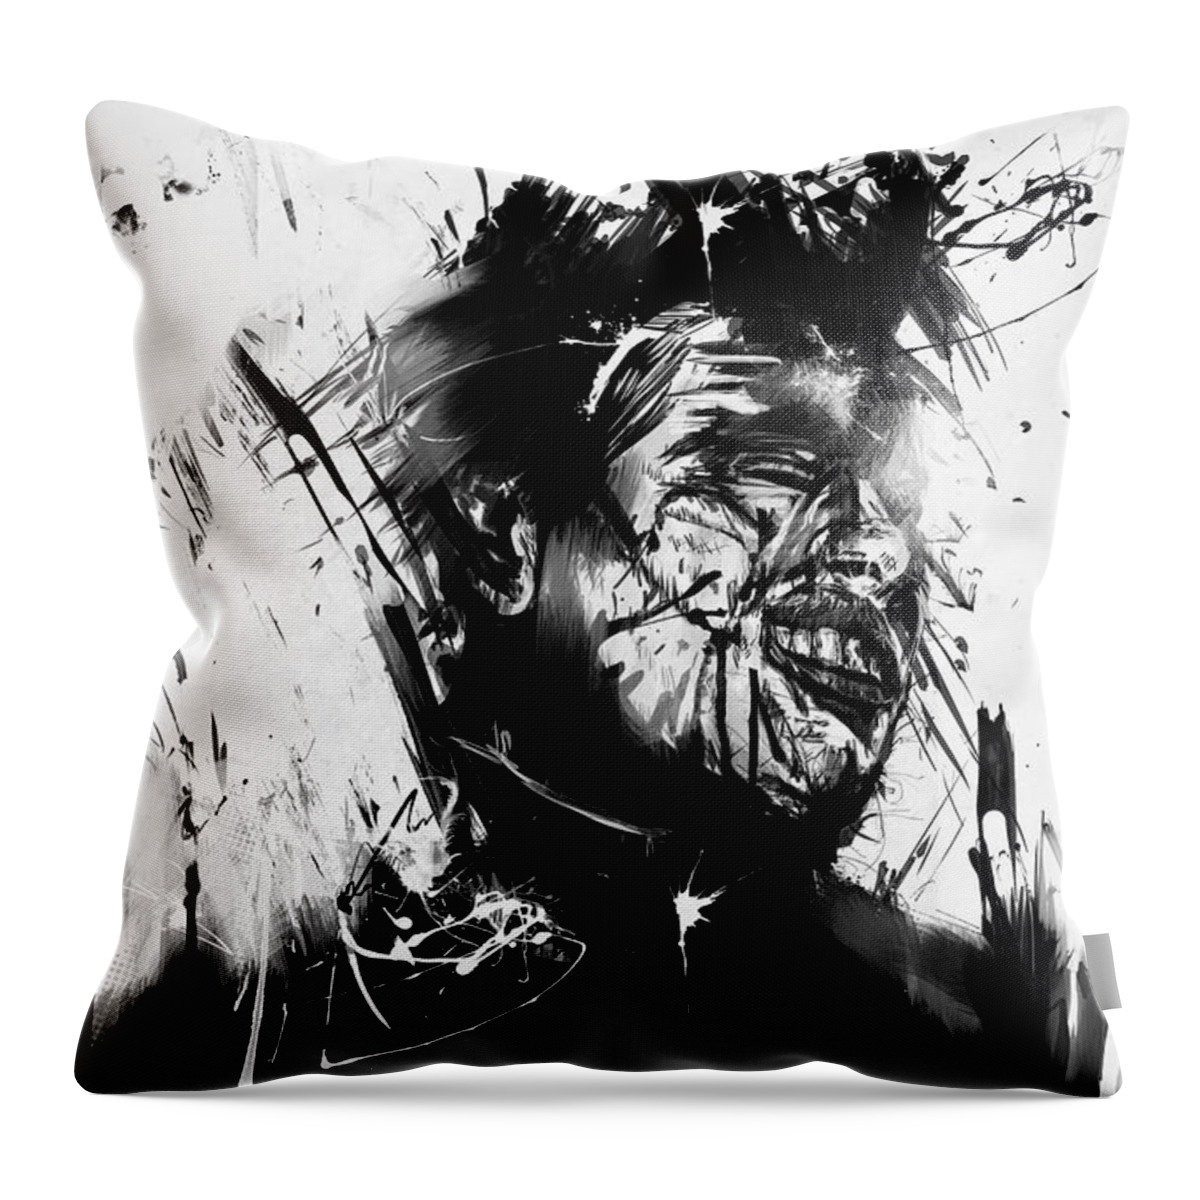 Surreal Throw Pillow featuring the mixed media Glasswall by Balazs Solti